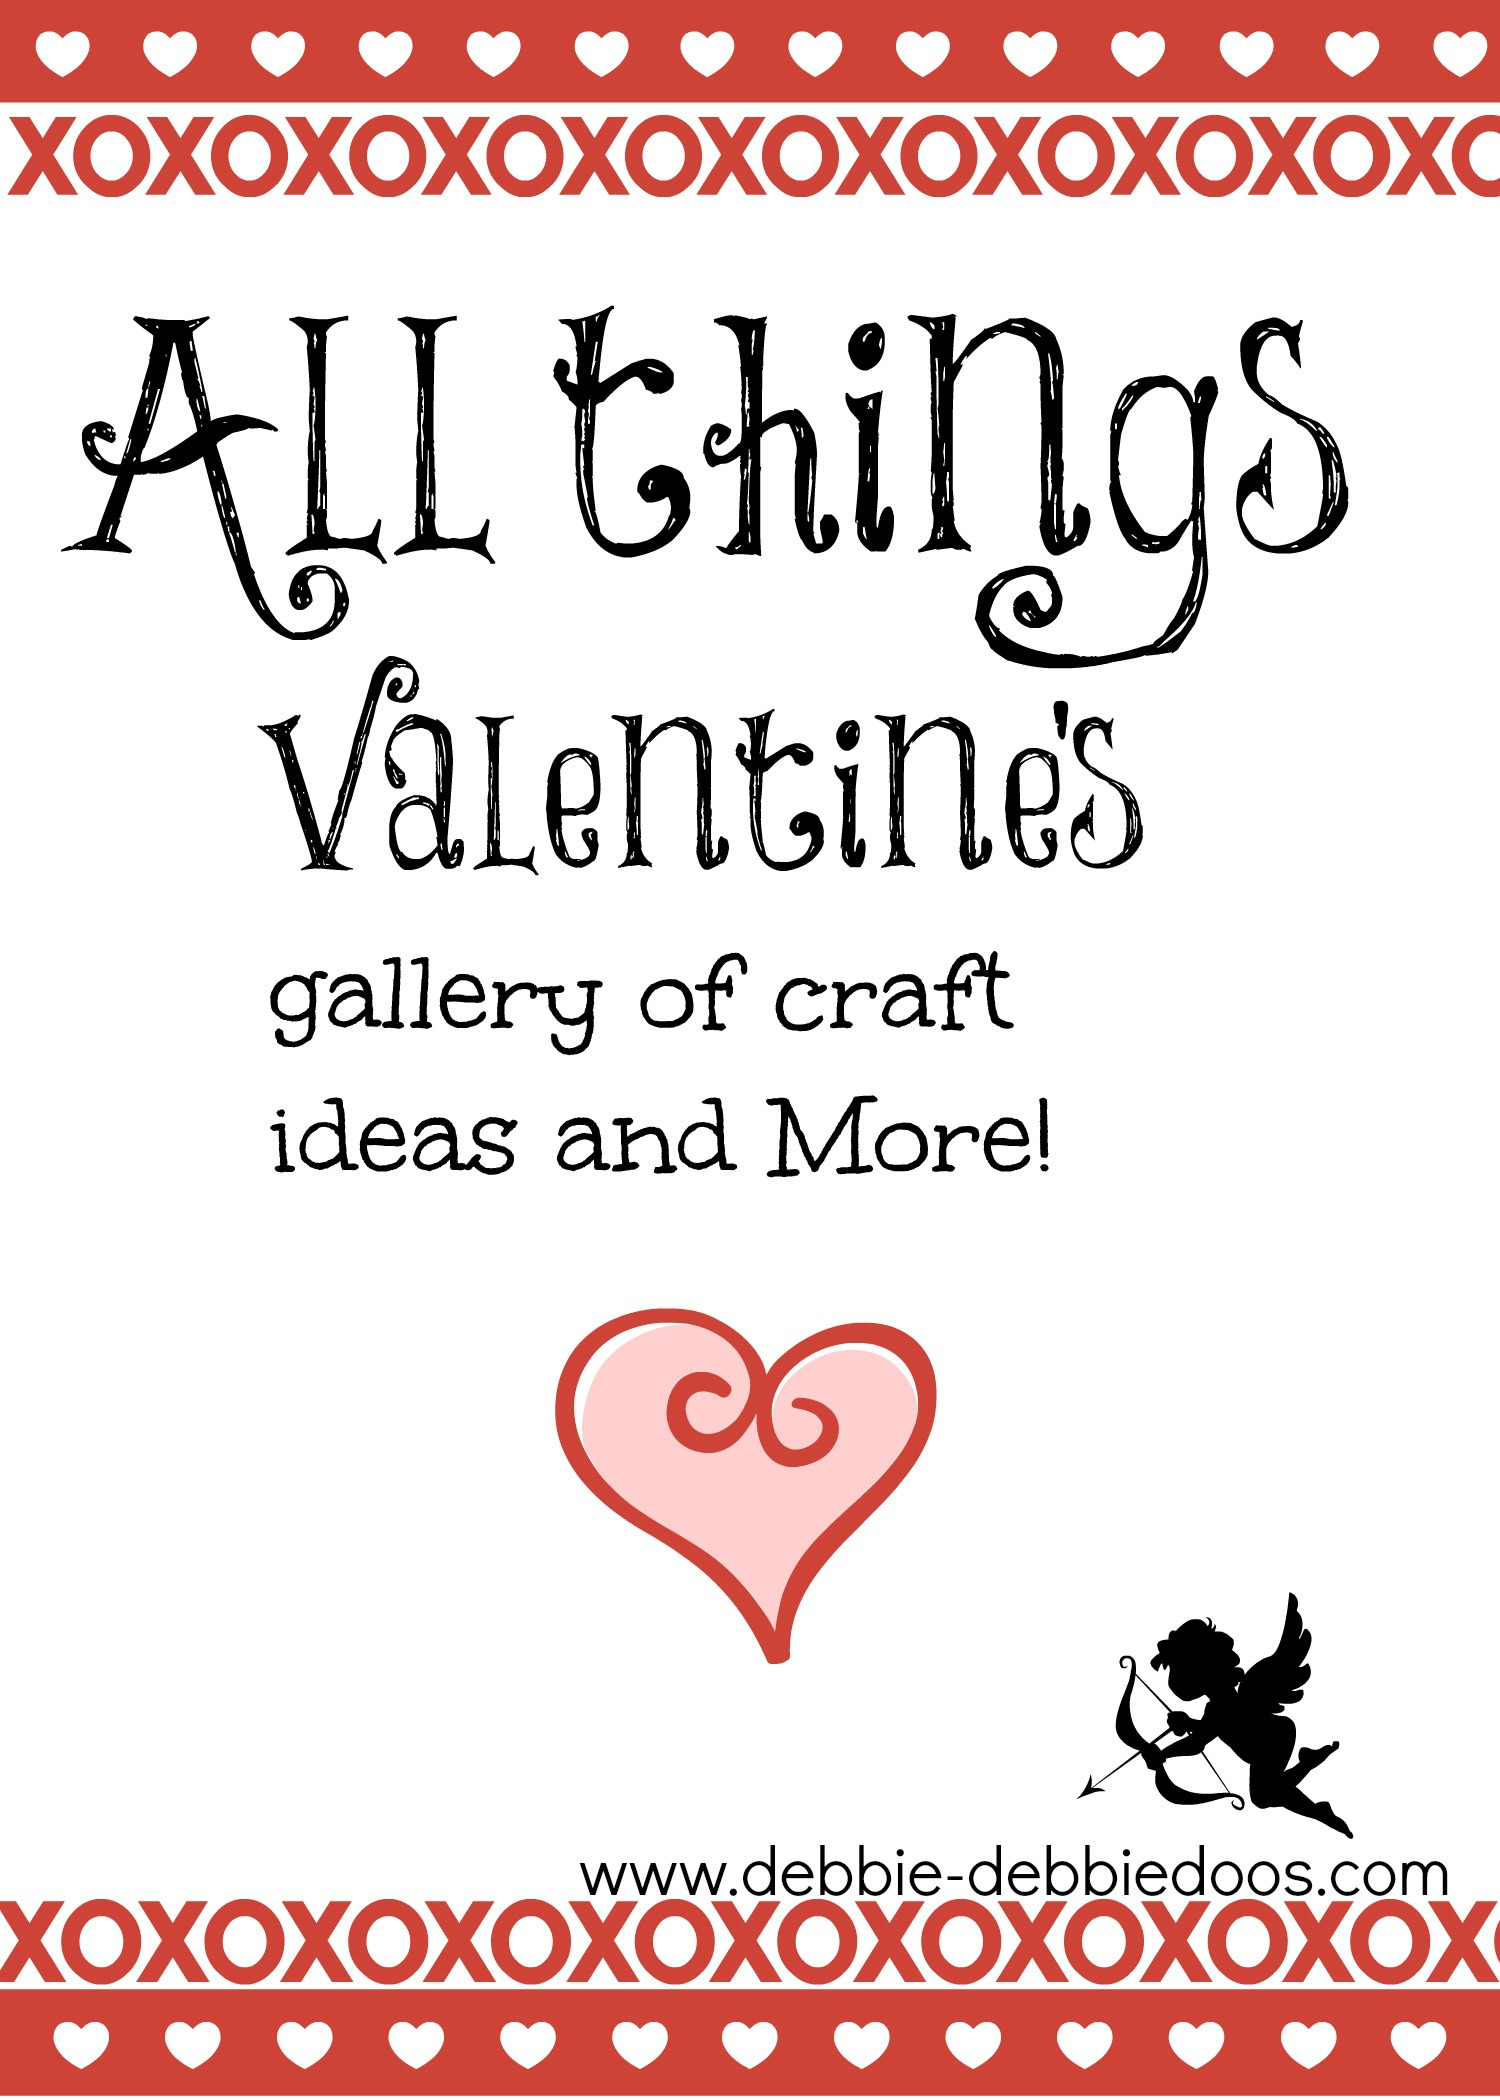 All things Valentines